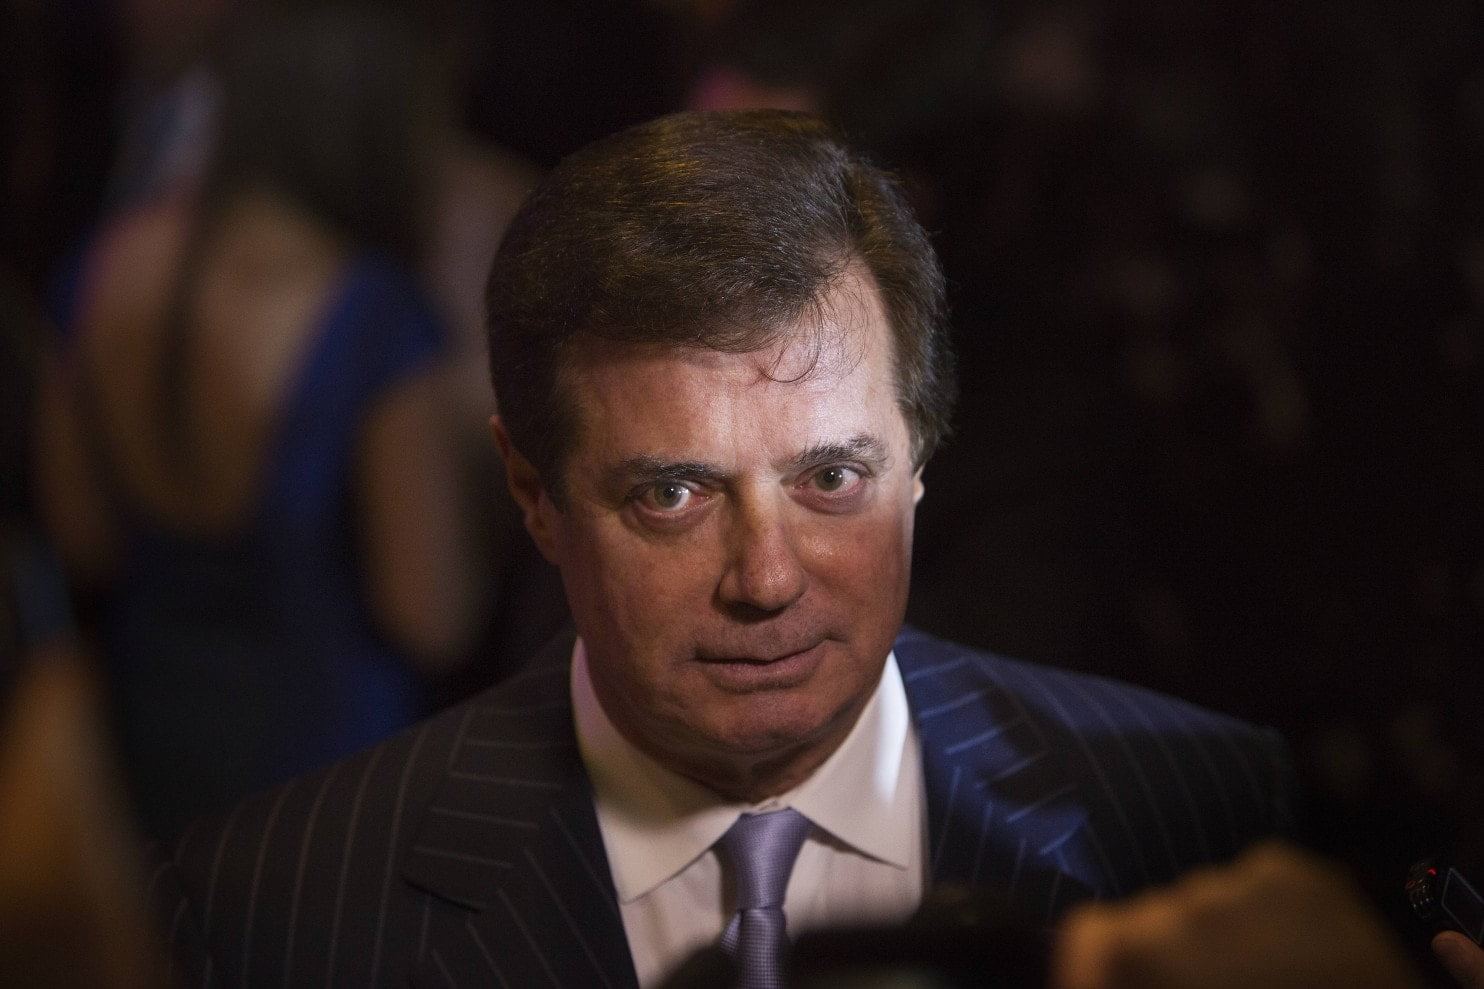 Indictment refers to tax evasion activities by Manafort prior...